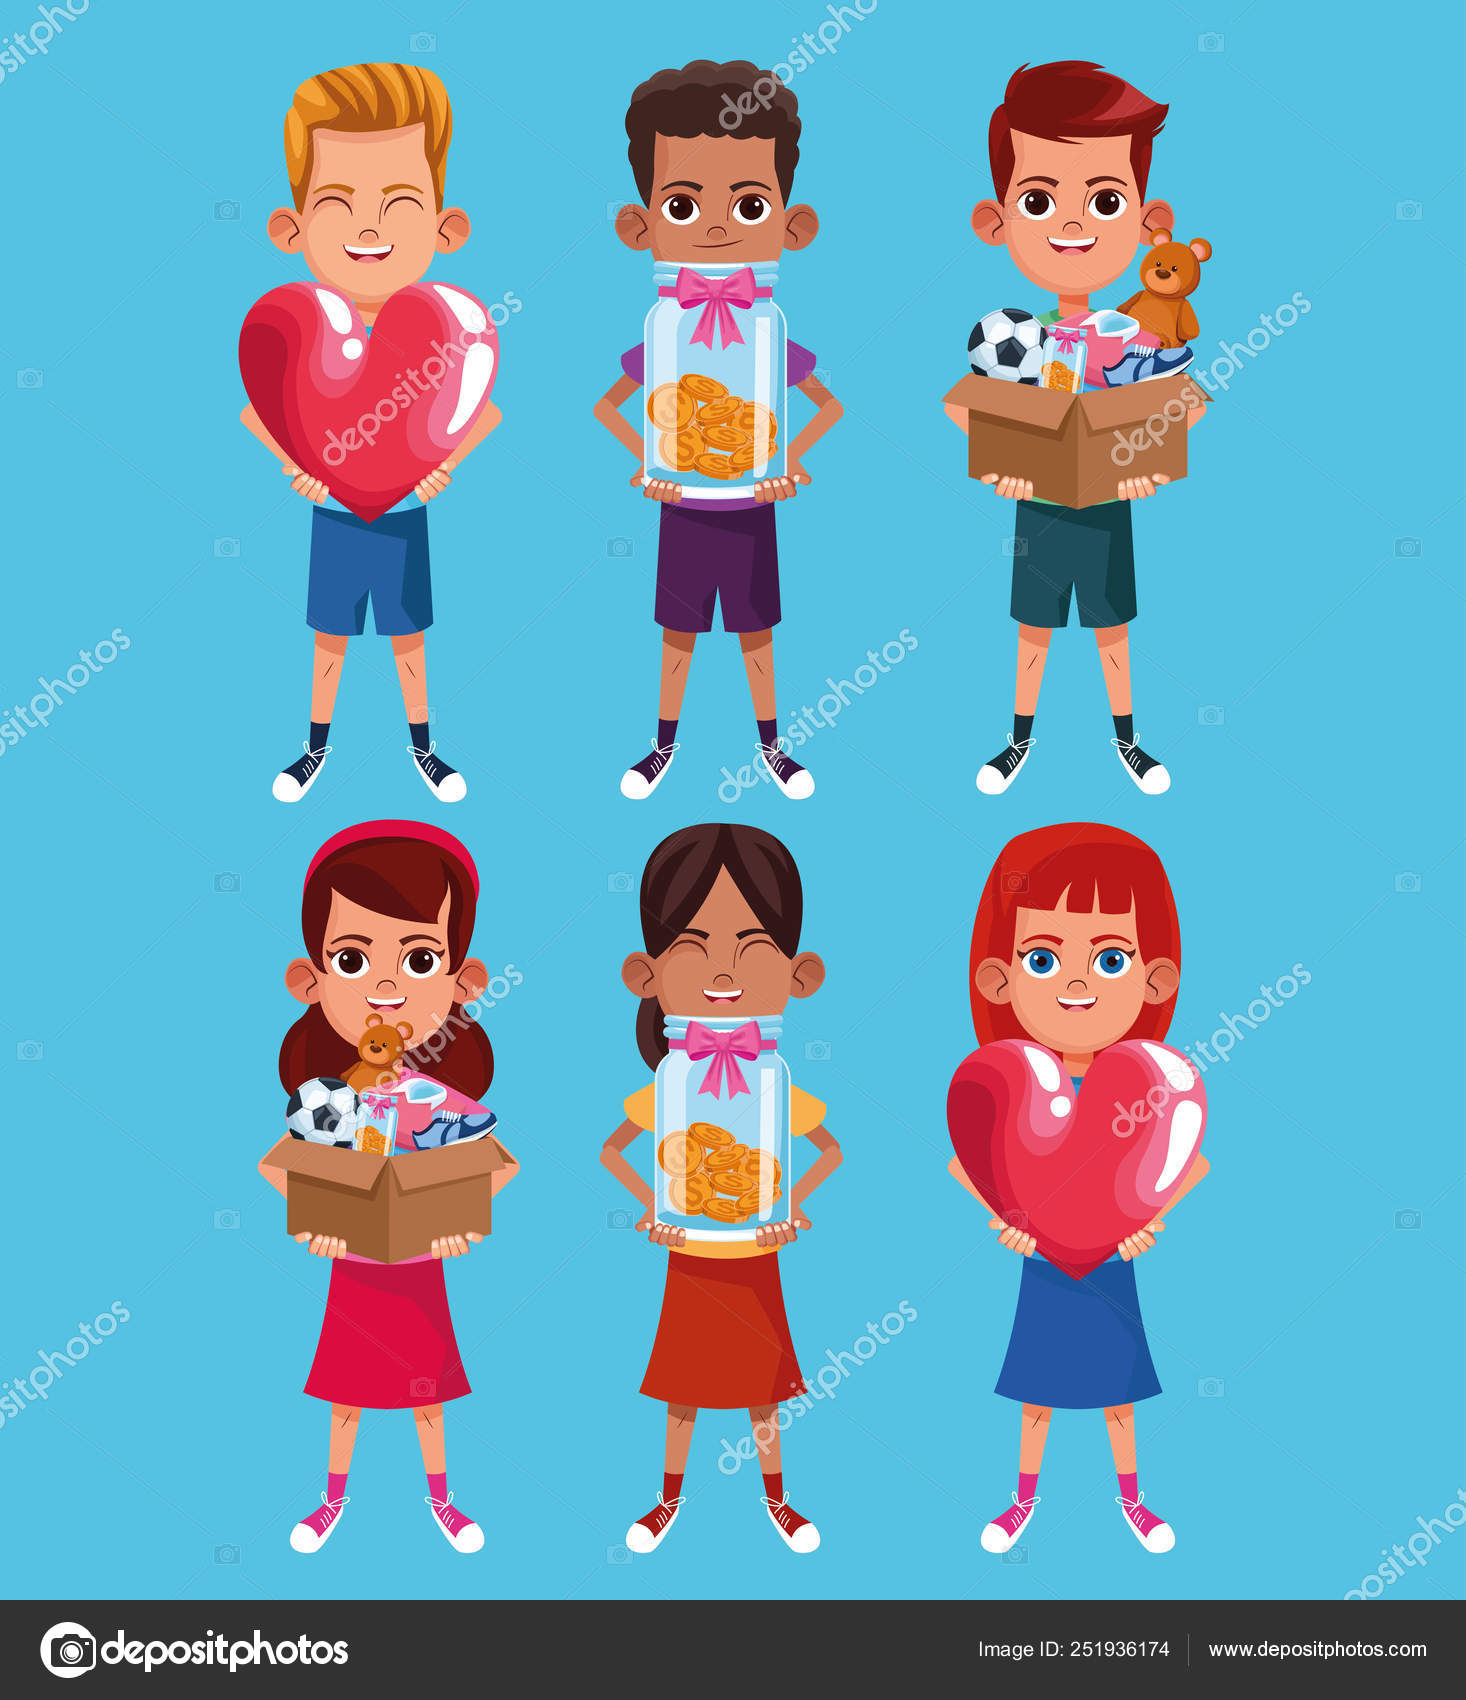 Images Charity Cartoon Kids Donation And Charity Cartoon Stock Vector C Jemastock 251936174 This is one out of three short pilot episodes pitched to fox by. images charity cartoon kids donation and charity cartoon stock vector c jemastock 251936174